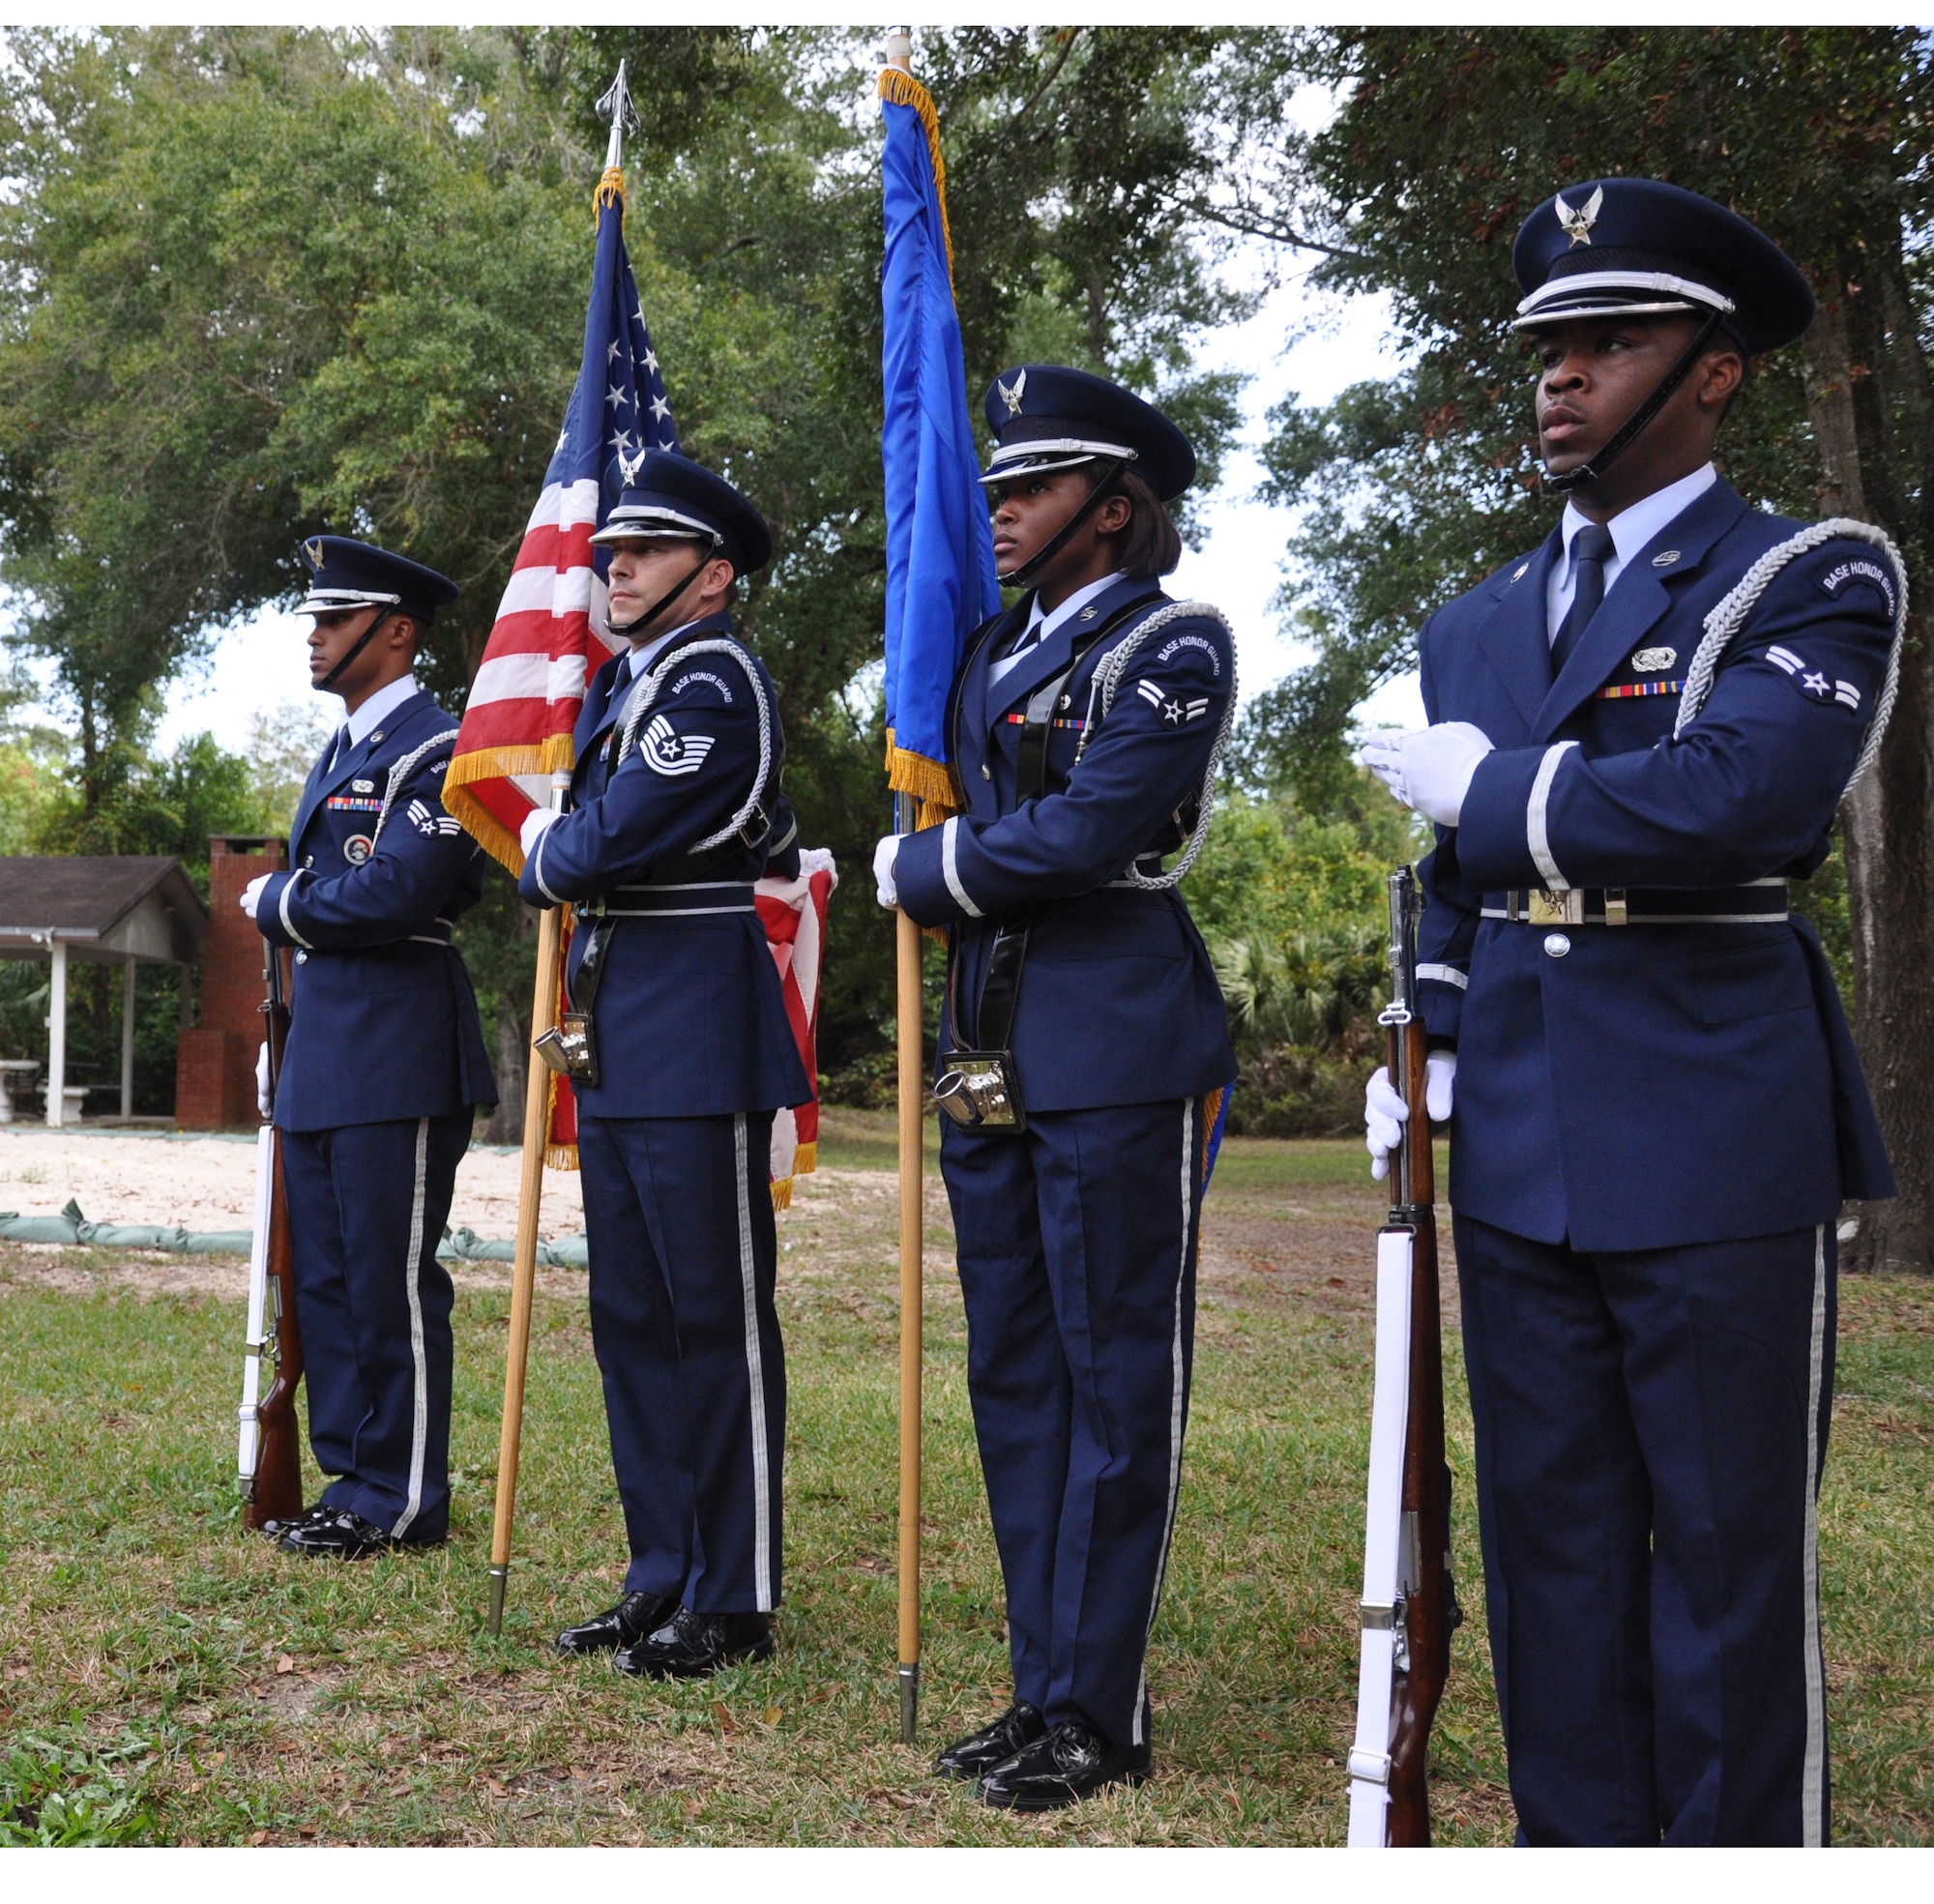 EGLIN AIR FORCE BASE, Fla. -- Airman 1st Class Bobby Lacy, left, Tech. Sgt. Chris Lajoie, Airman 1st Class Brittany Polk and Senior Airman Maurice Ward practice presenting the colors at the Eglin Honor Guard training compound. The Eglin Honor Guard performs ceremonies such as funerals, weddings and other official ceremonies. (U.S. Air Force photo by Airman 1st Class Anthony Jennings)